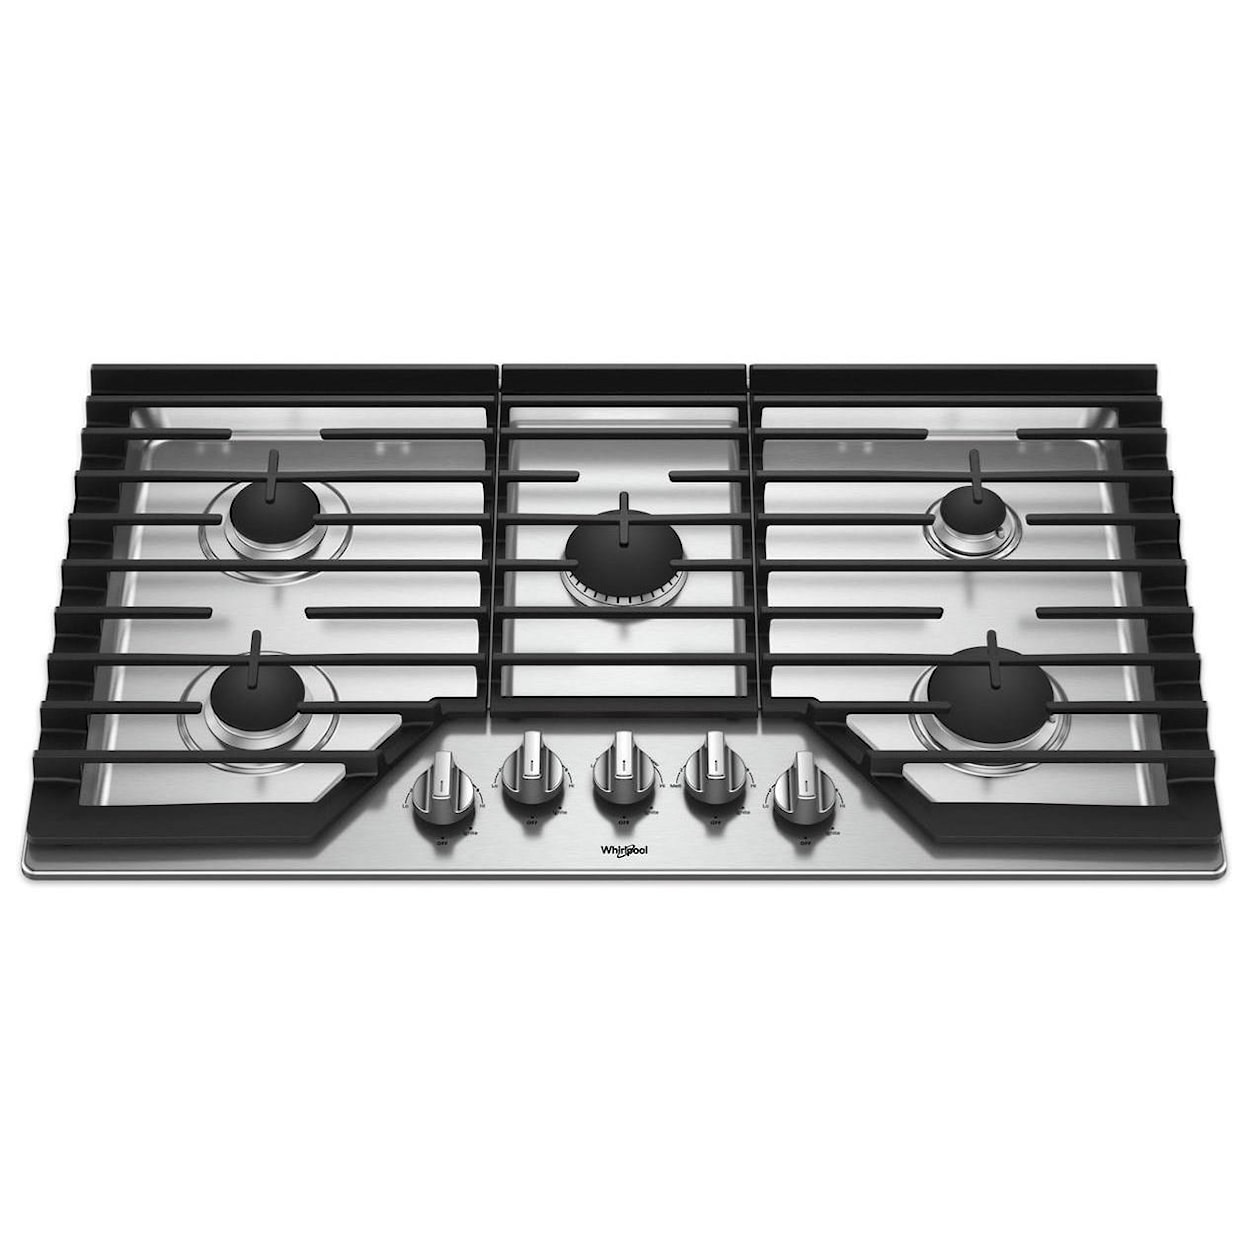 Whirlpool Gas Cooktops 36" Gas Cooktop with Griddle